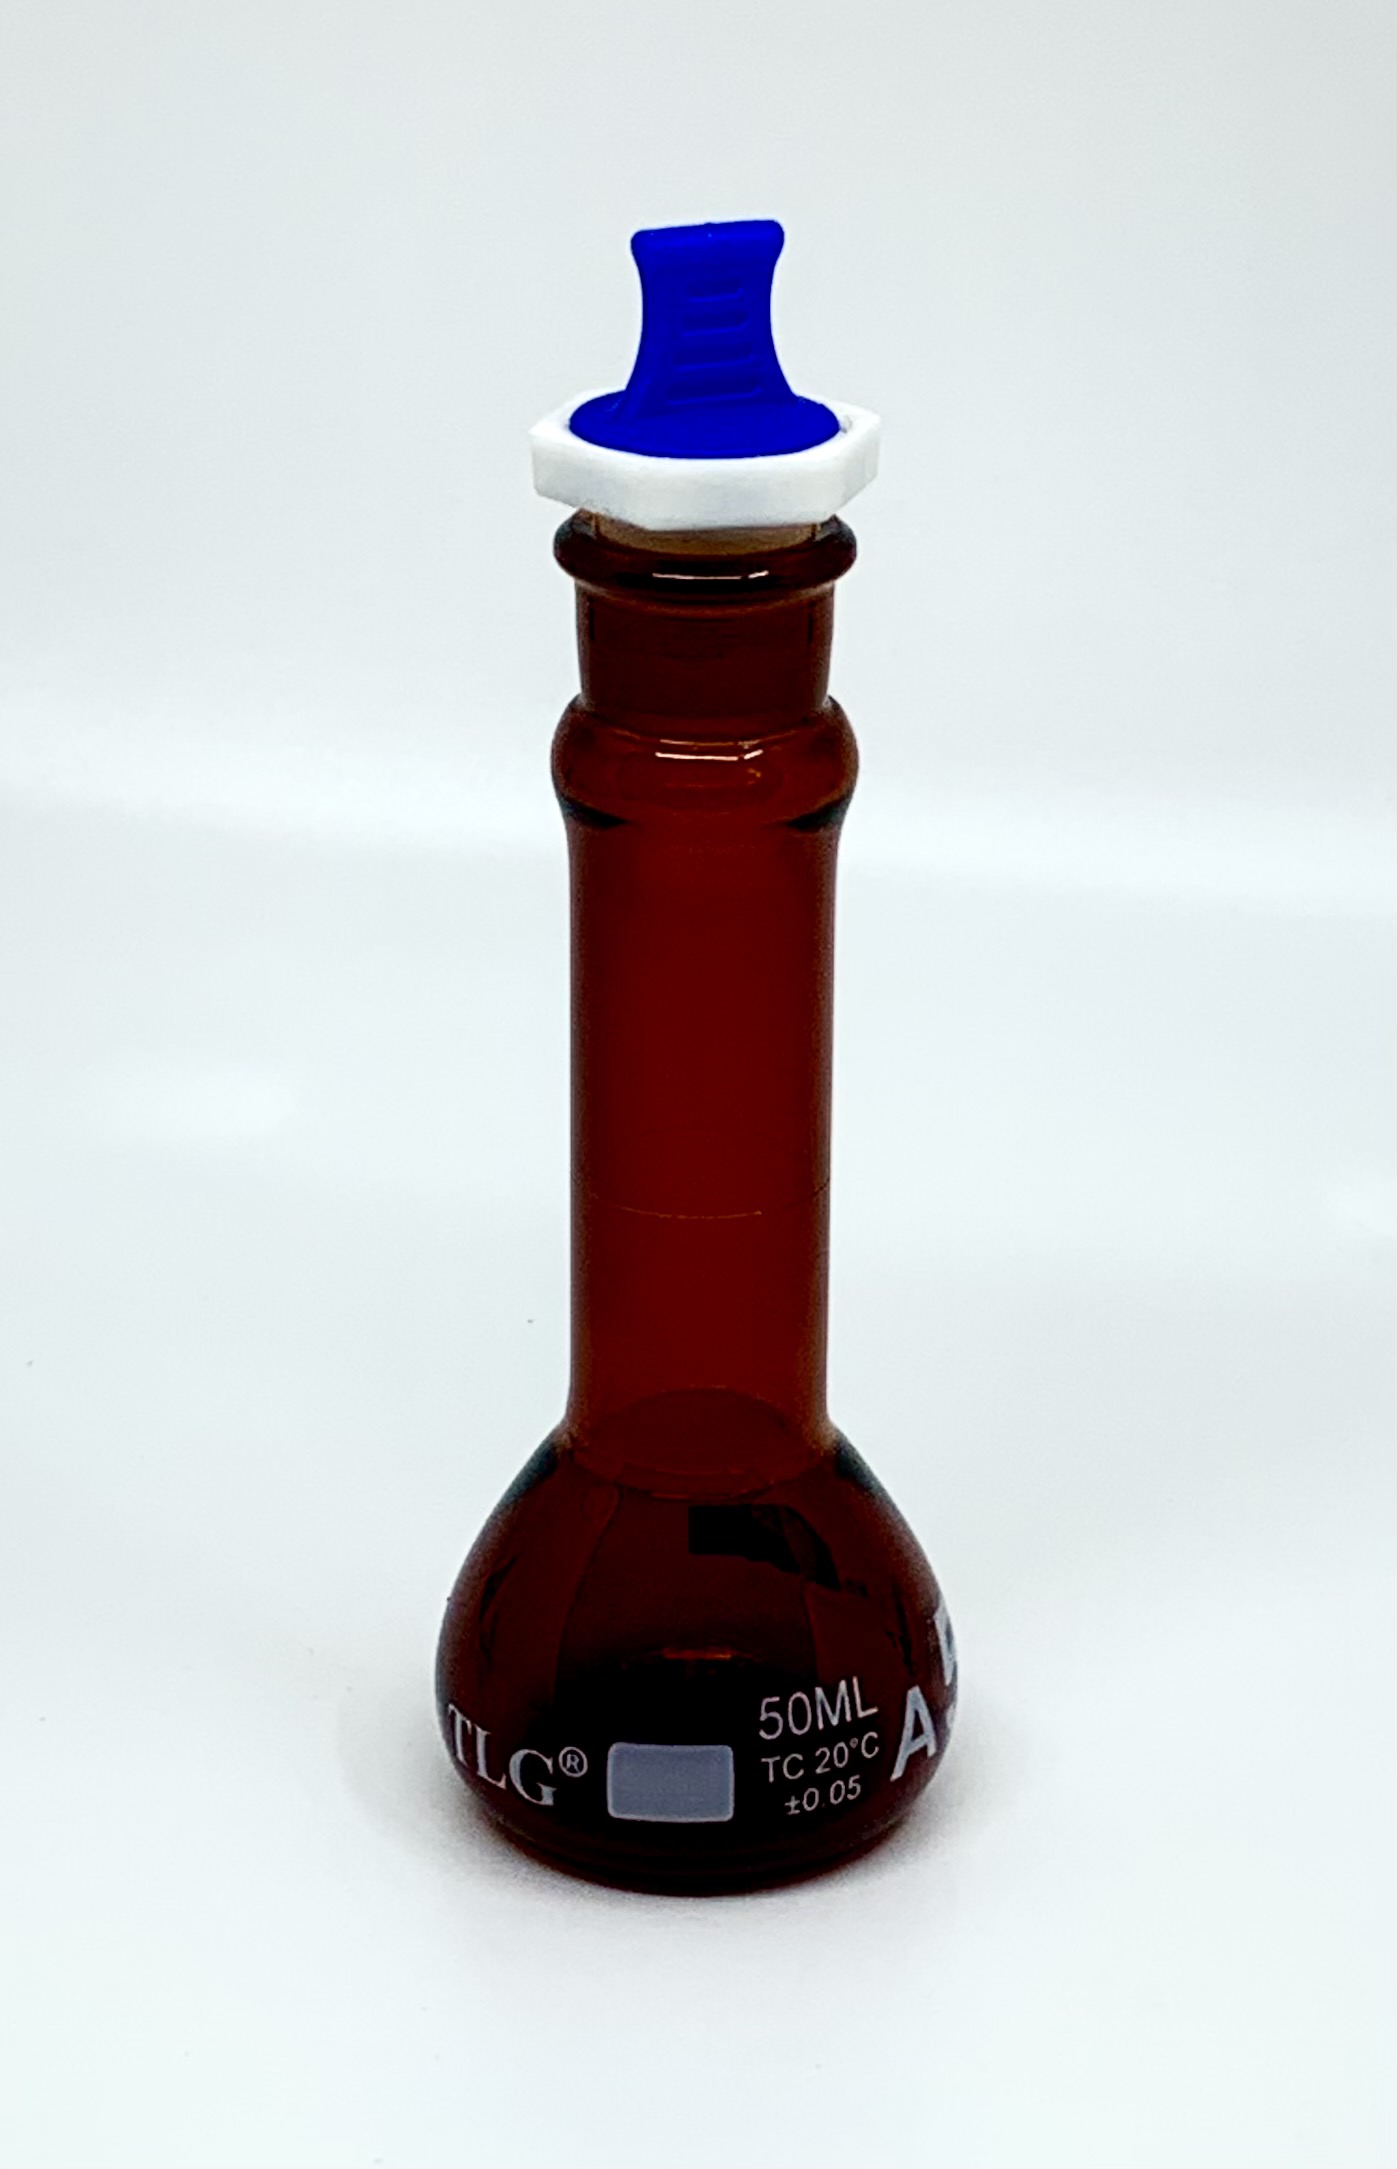 Serialized and Certified Volumetric Flask, Class A, Low Actinic Amber, Wide Mouth, With Polyethylene Stopper, As Per USP Standards